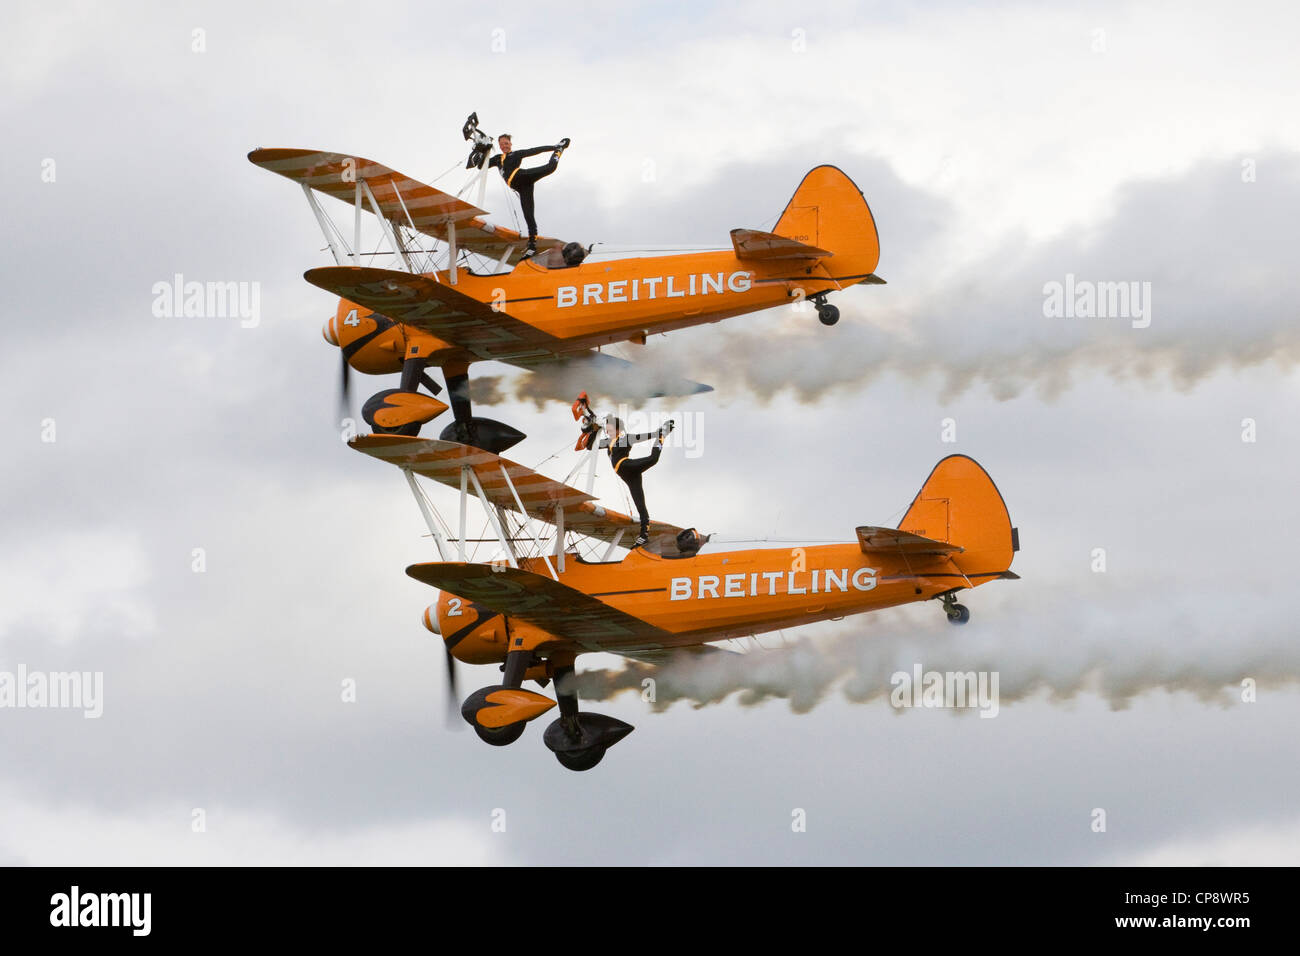 Breitling wingwalkers on display at the Abingdon Air Show England Stock Photo